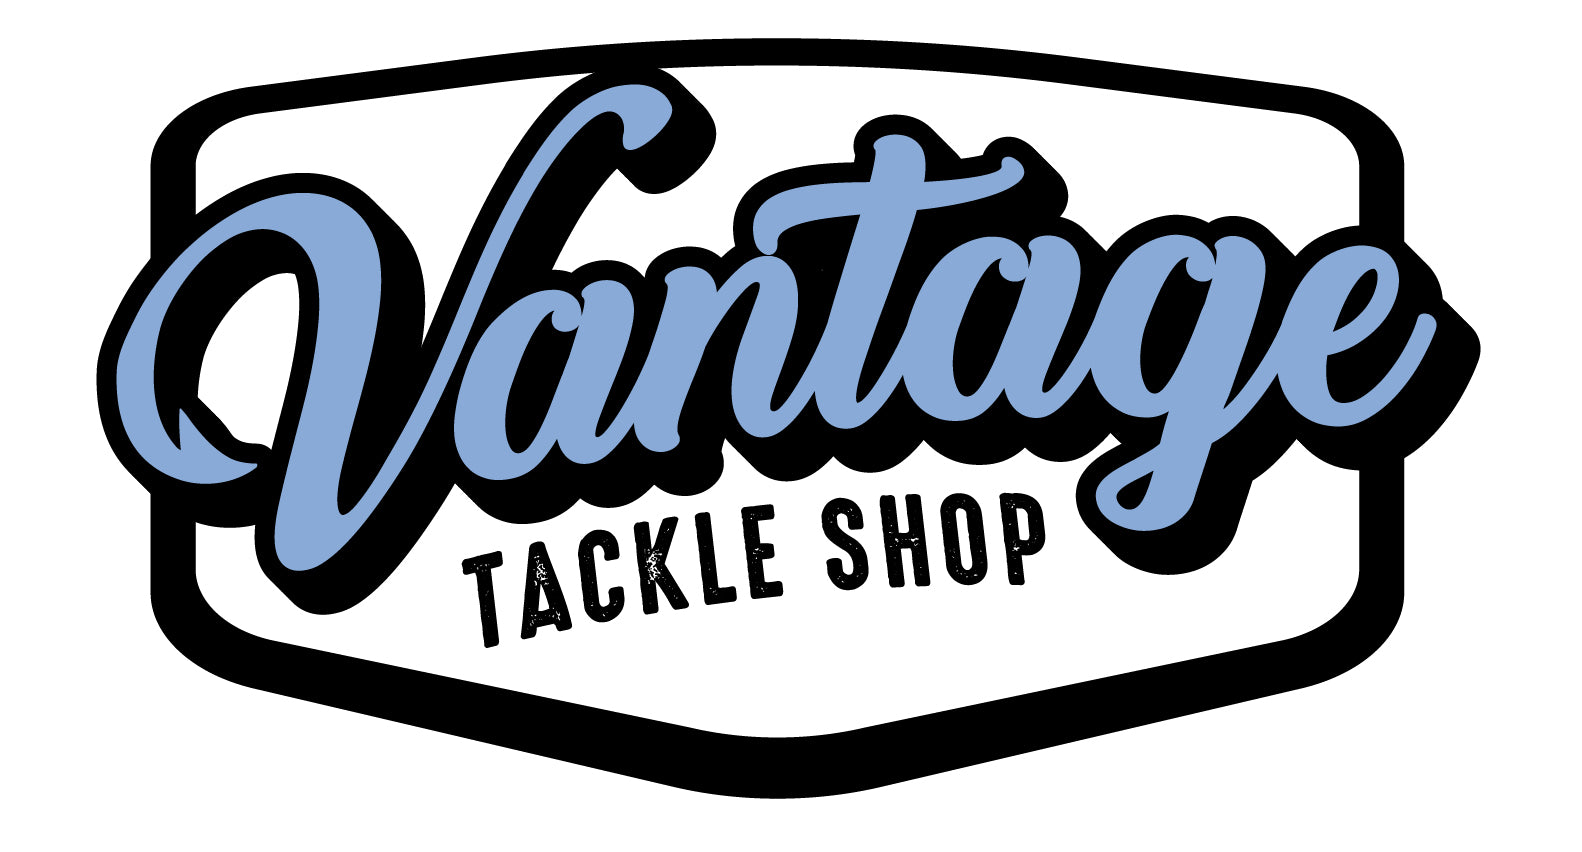 The largest selection of custom fishing tackle on the web! – Vantage Tackle